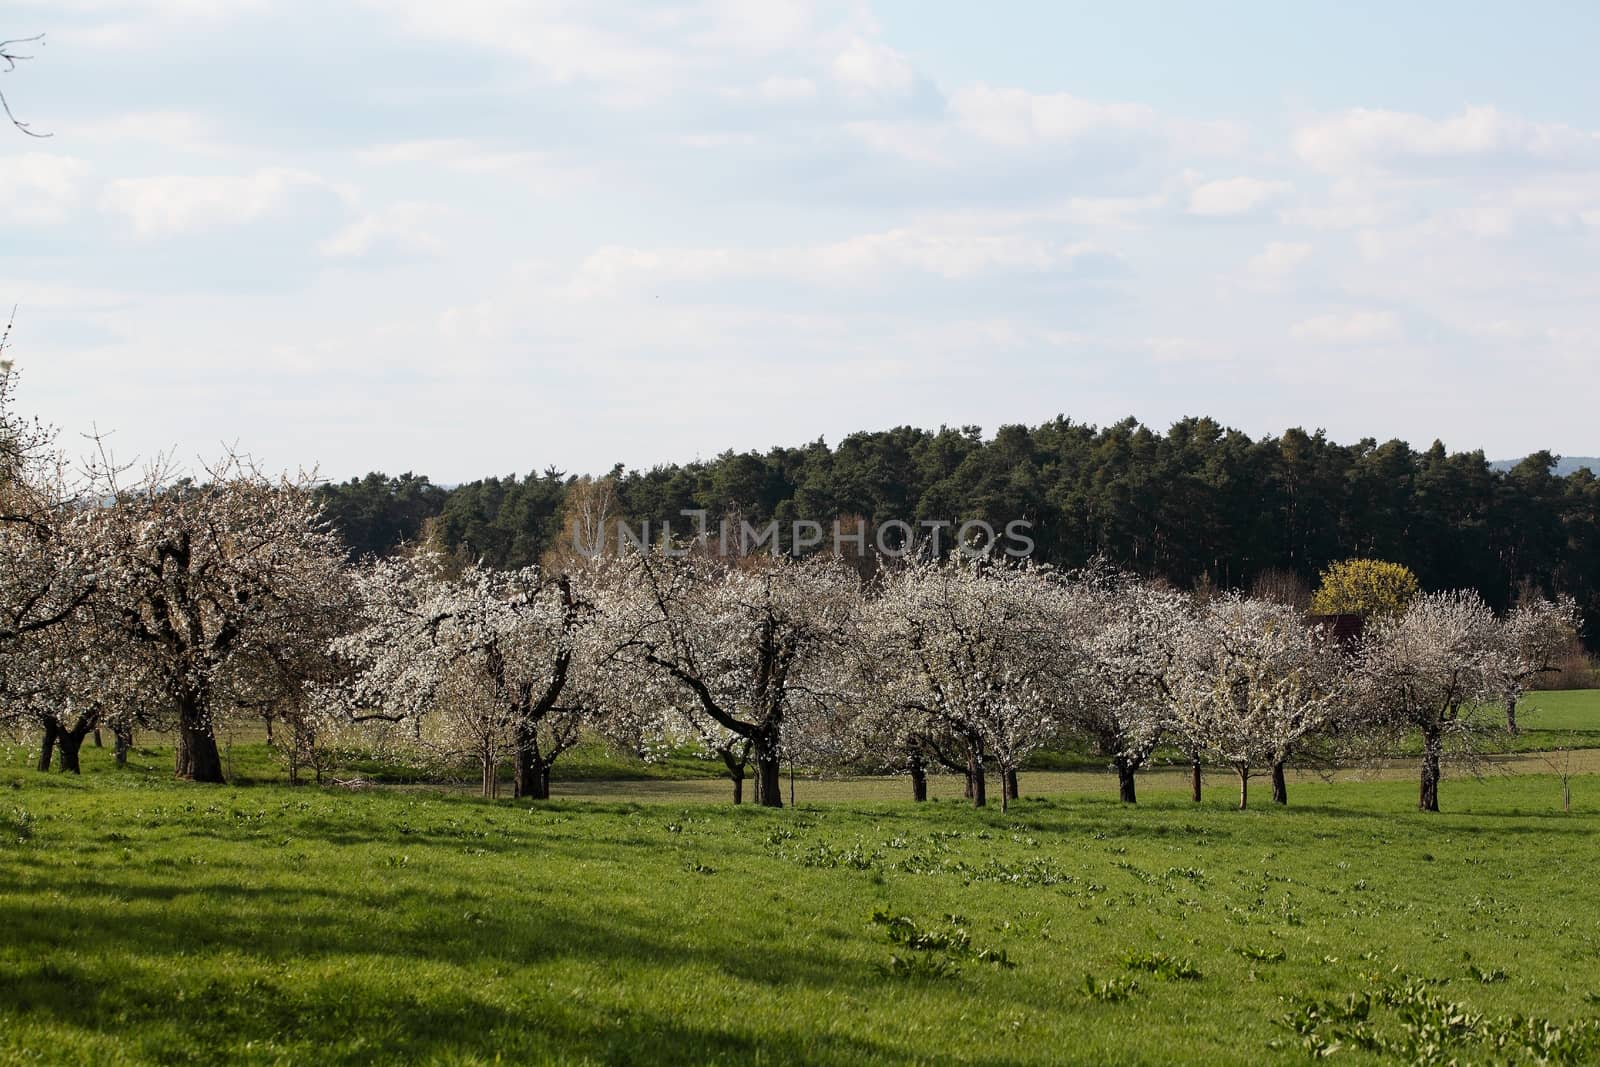 Cherry trees with blossoms in Spring.